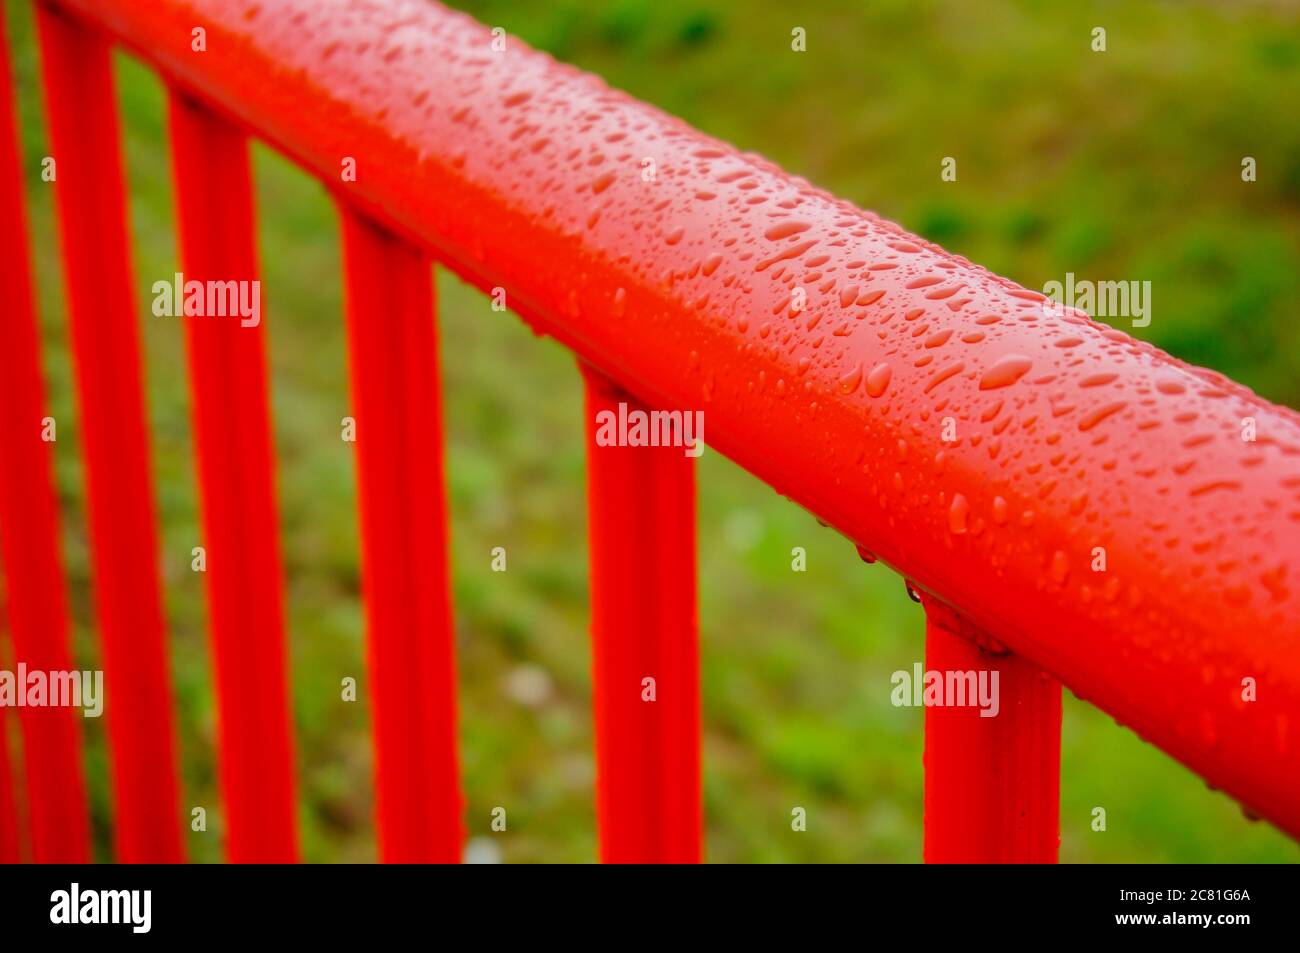 Closeup shot of a red metallic fence with vertical bars next to a green field on a rainy day Stock Photo